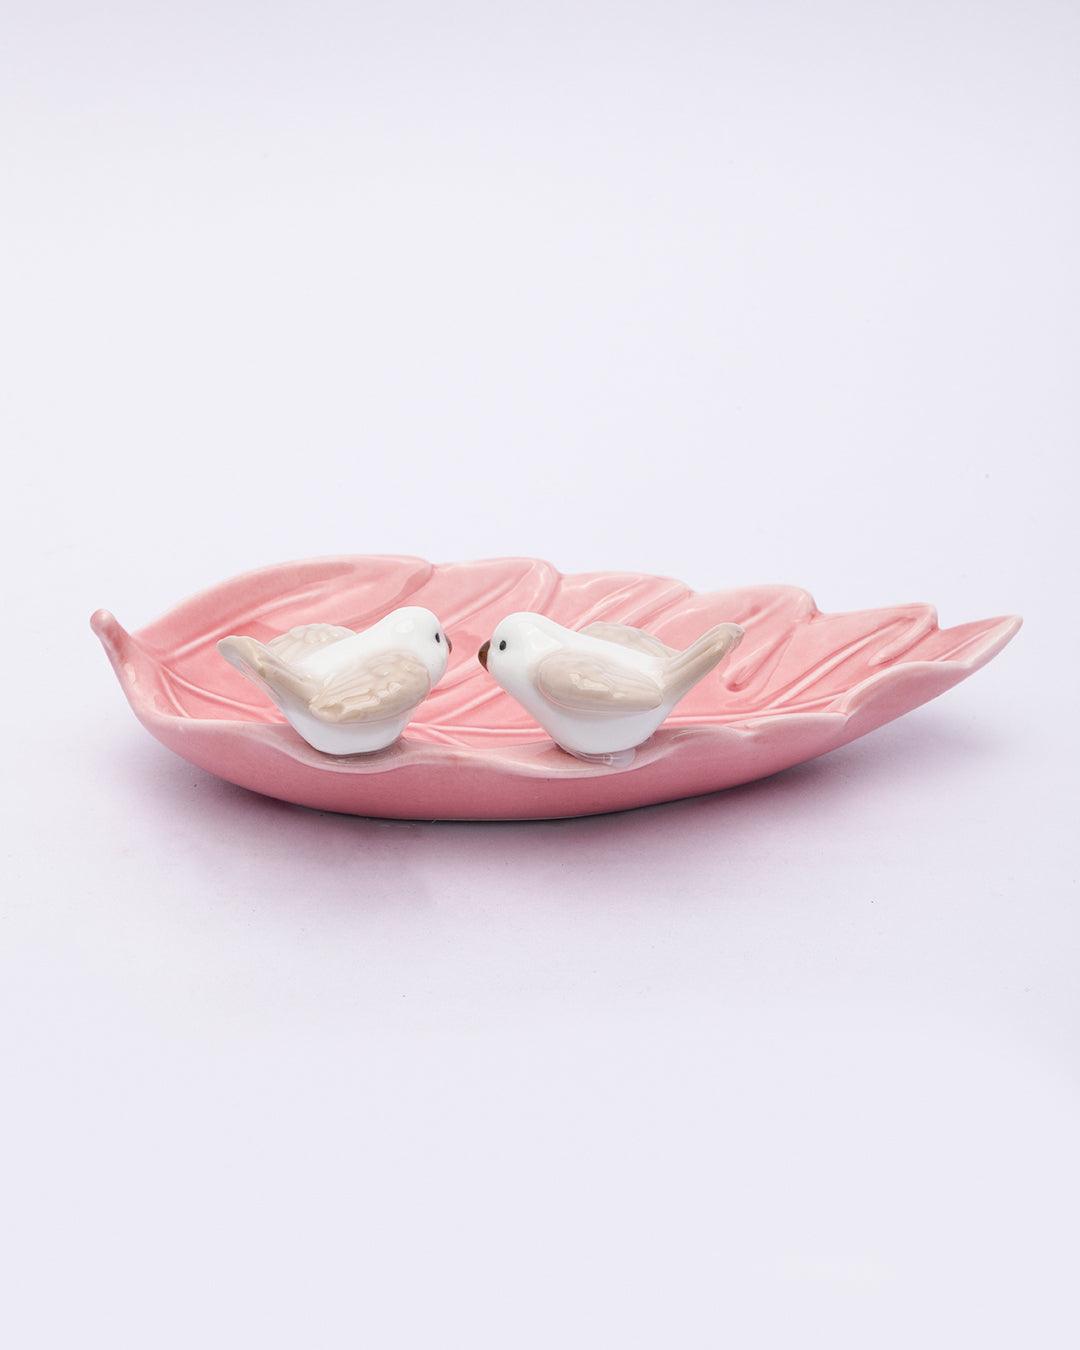 Jewellery Holder Tray, Crafted Bird, for Dressing Table, Ring Dash, Triangle, Pink, Ceramic - MARKET 99